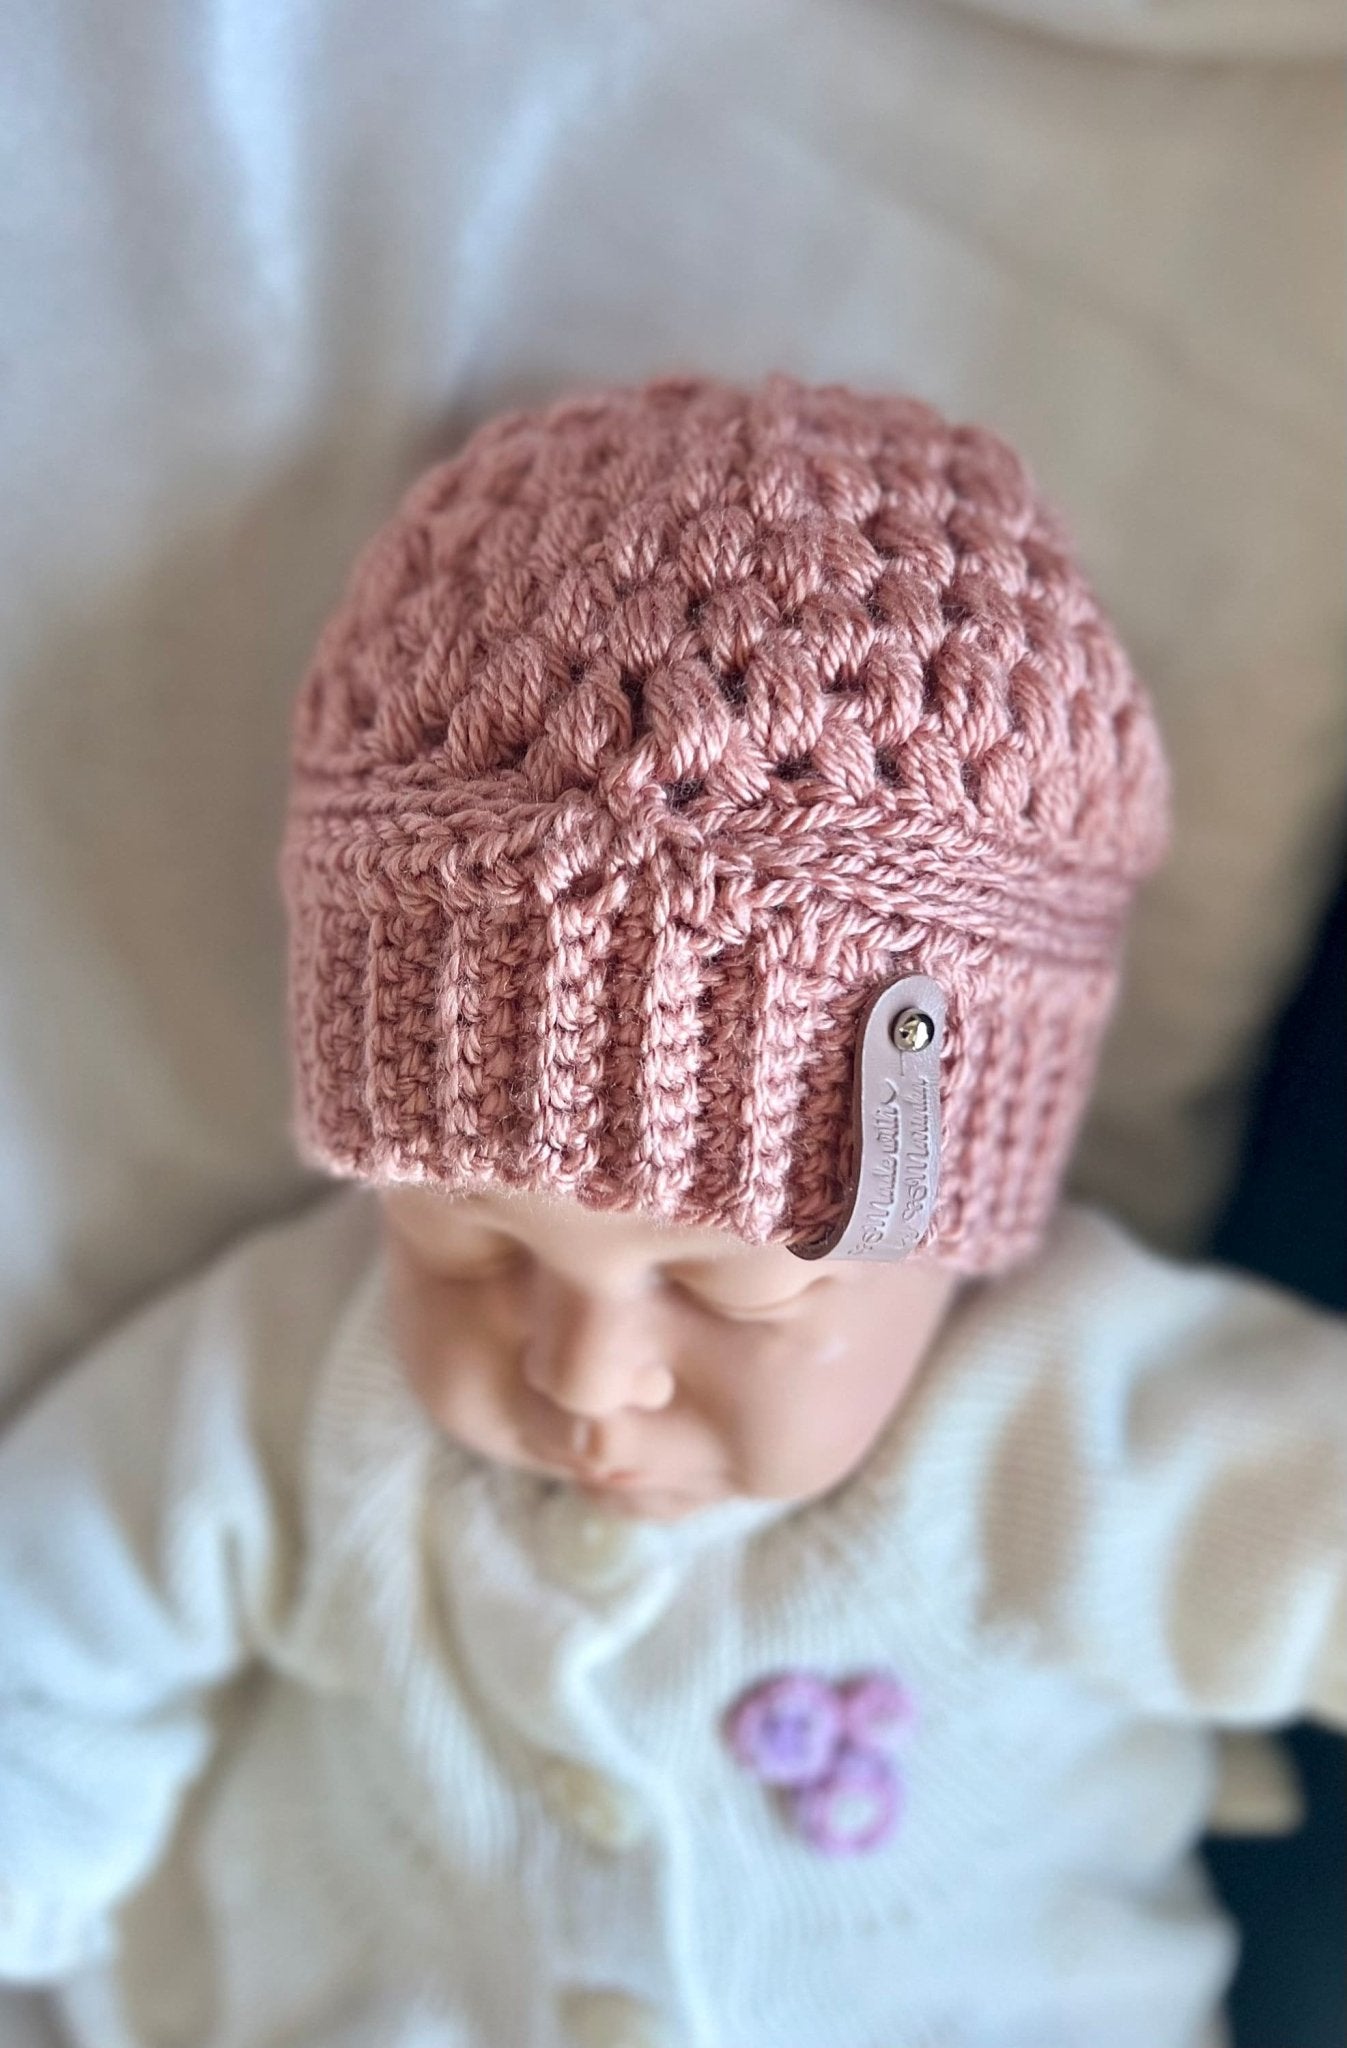 Crochet hat for baby girl, dusty rose pink baby girl hat, fall season hats, cute beanie hat, handmade crochet hat for girl - Lilly Grace Sparkle Boutique